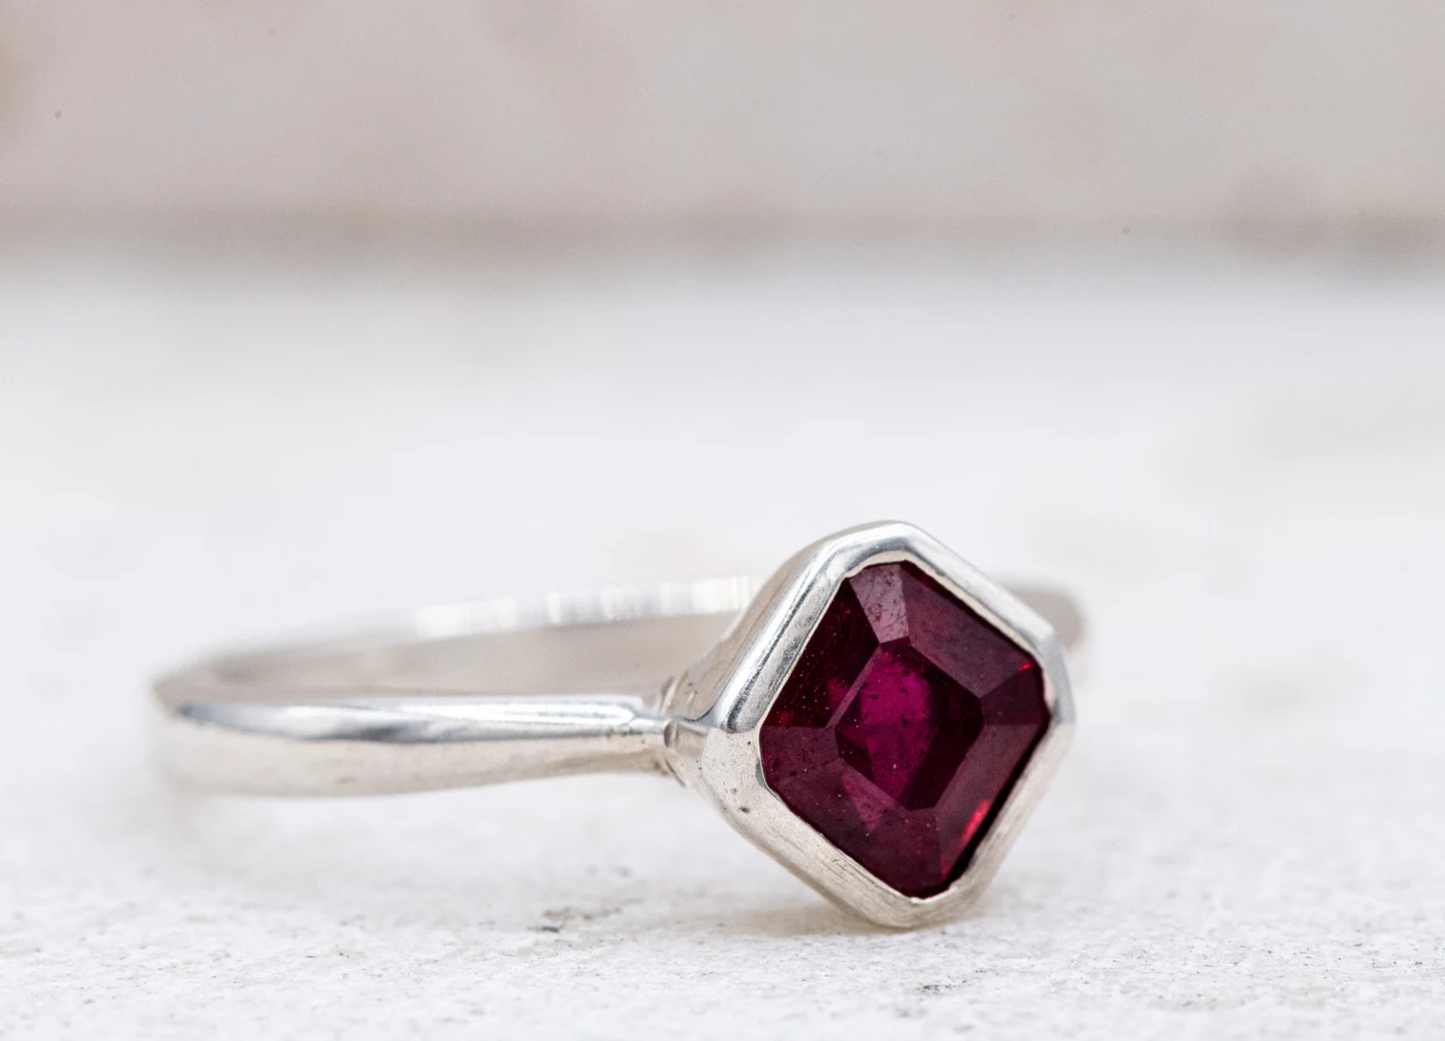 A Handmade Asscher Cut Ruby Ring in Sterling Silver with a ruby stone in the middle.